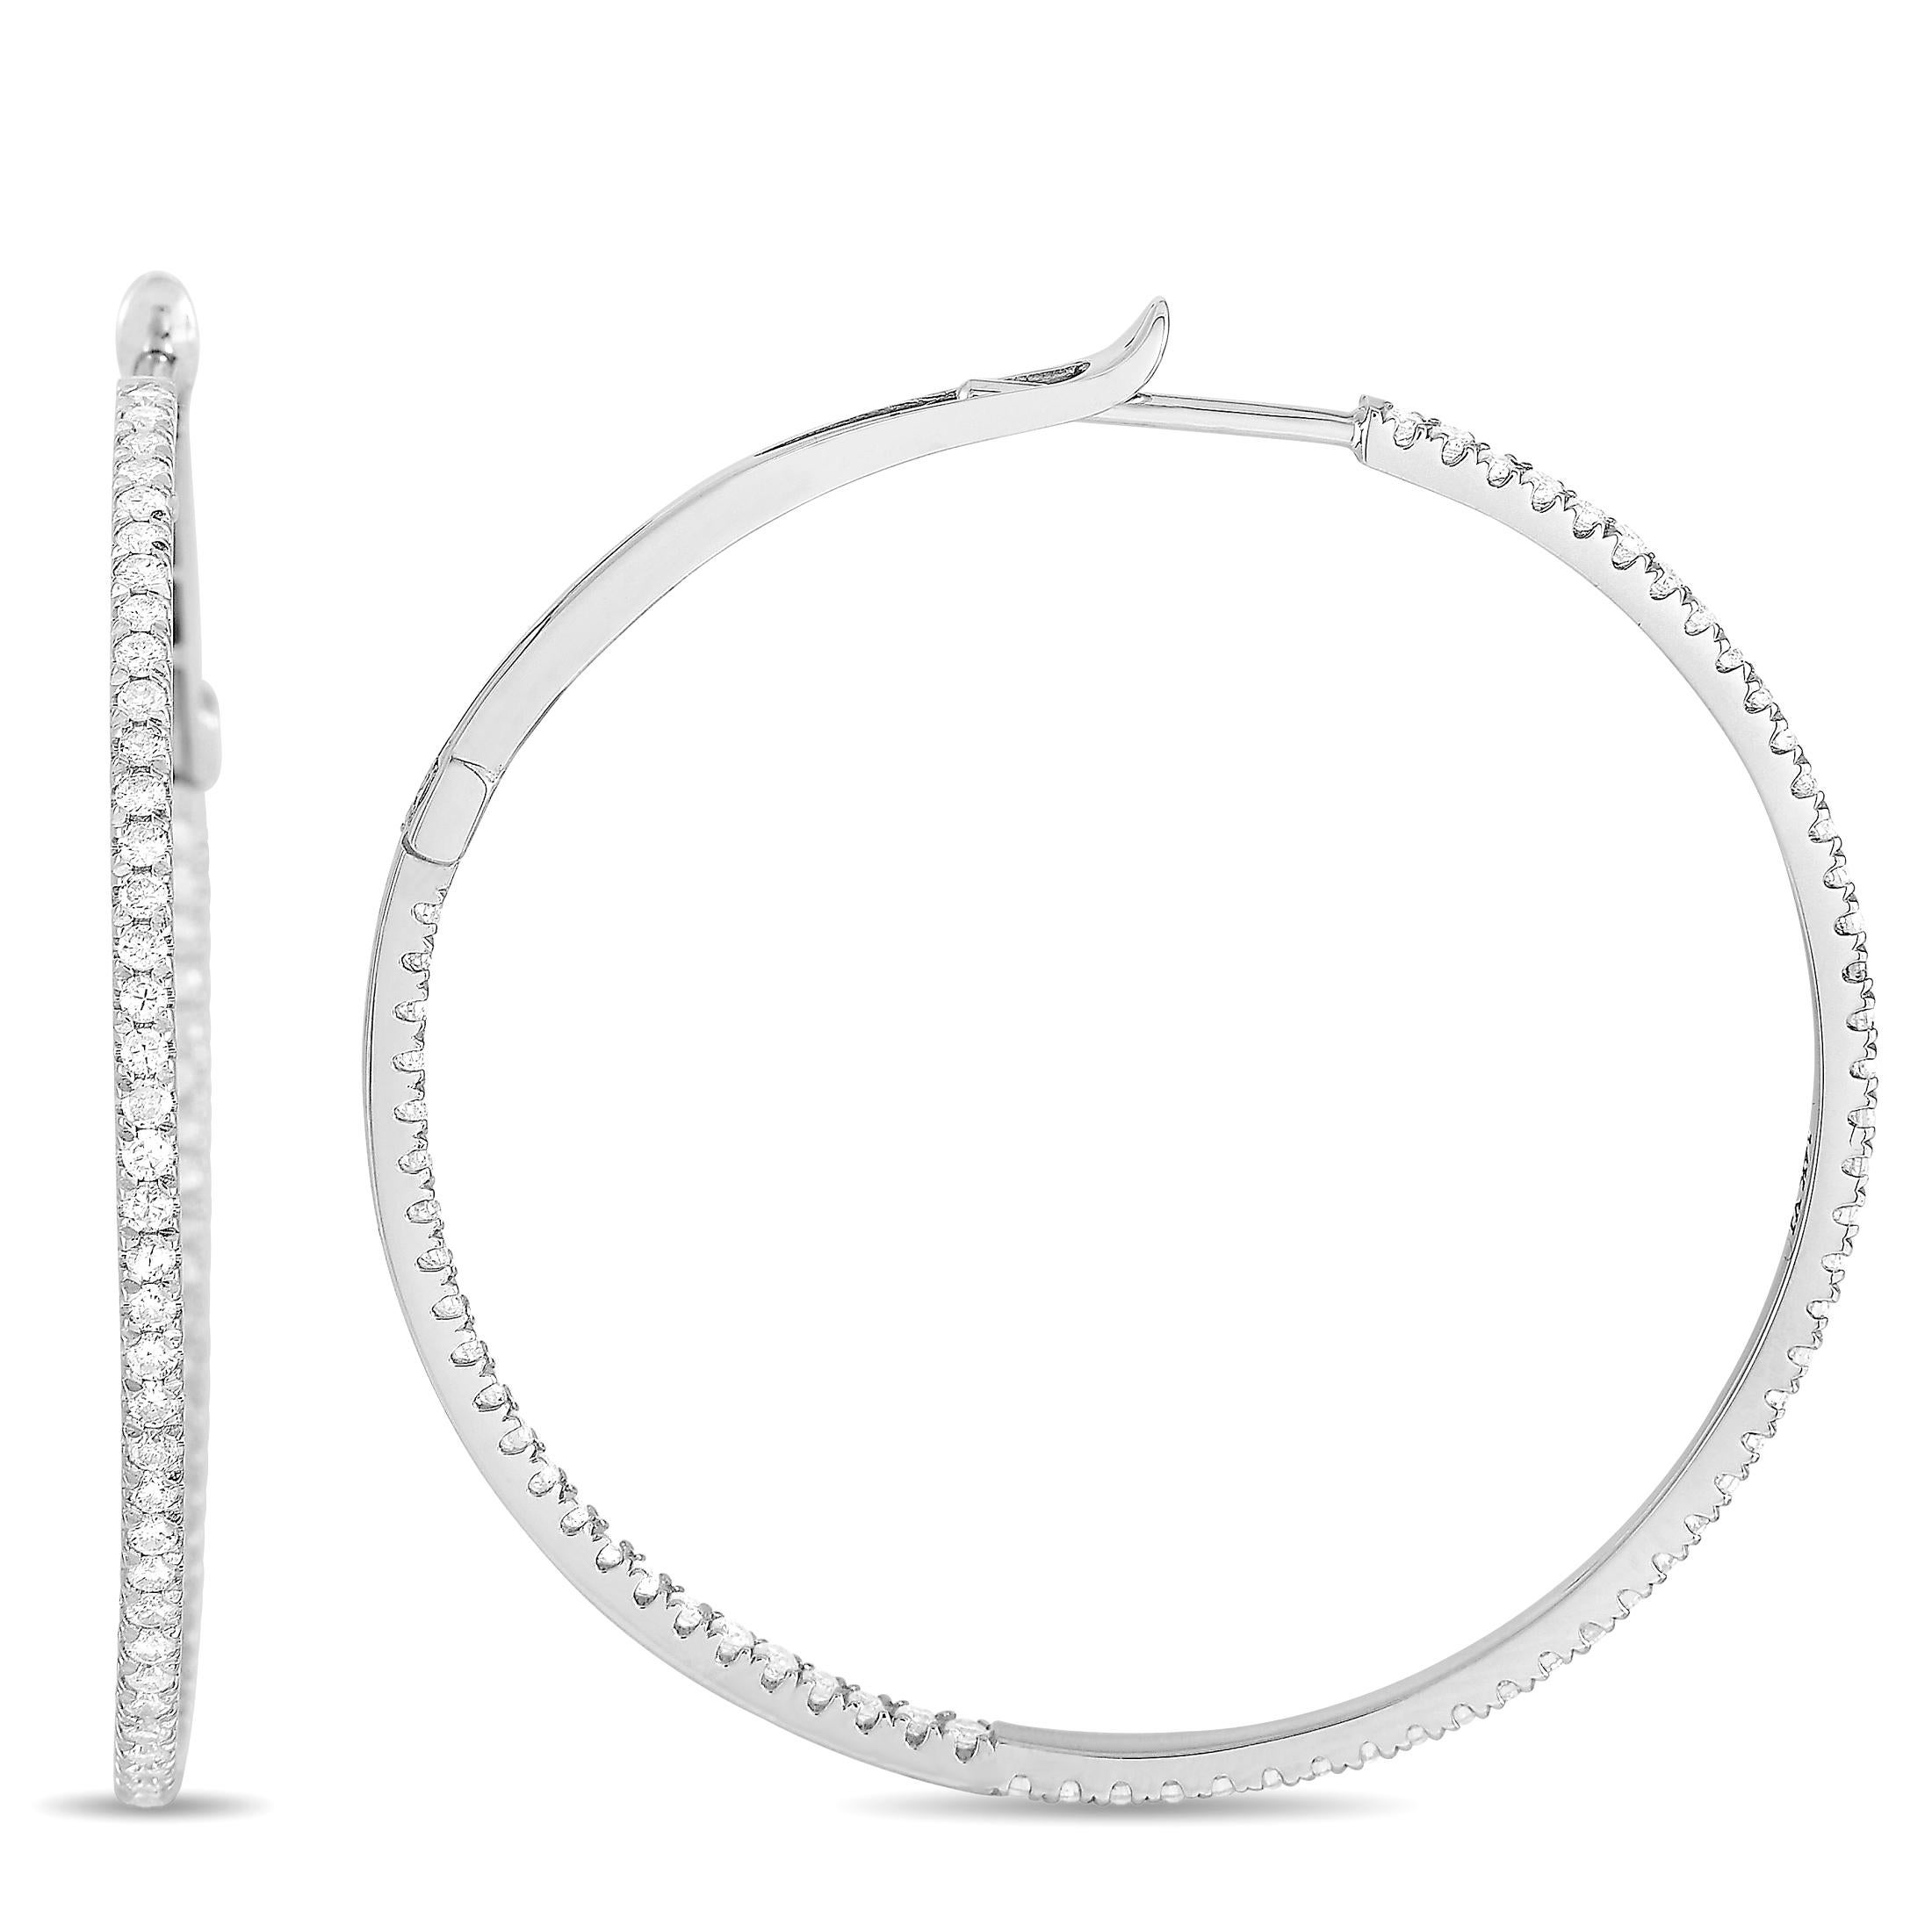 These LB Exclusive hoop earrings are made of 14K white gold and embellished with diamonds that amount to 1.35 carats. The earrings measure 2.75” in height and 2.75” in width and each of the two weighs 3.4 grams.
 
 The pair is offered in brand new